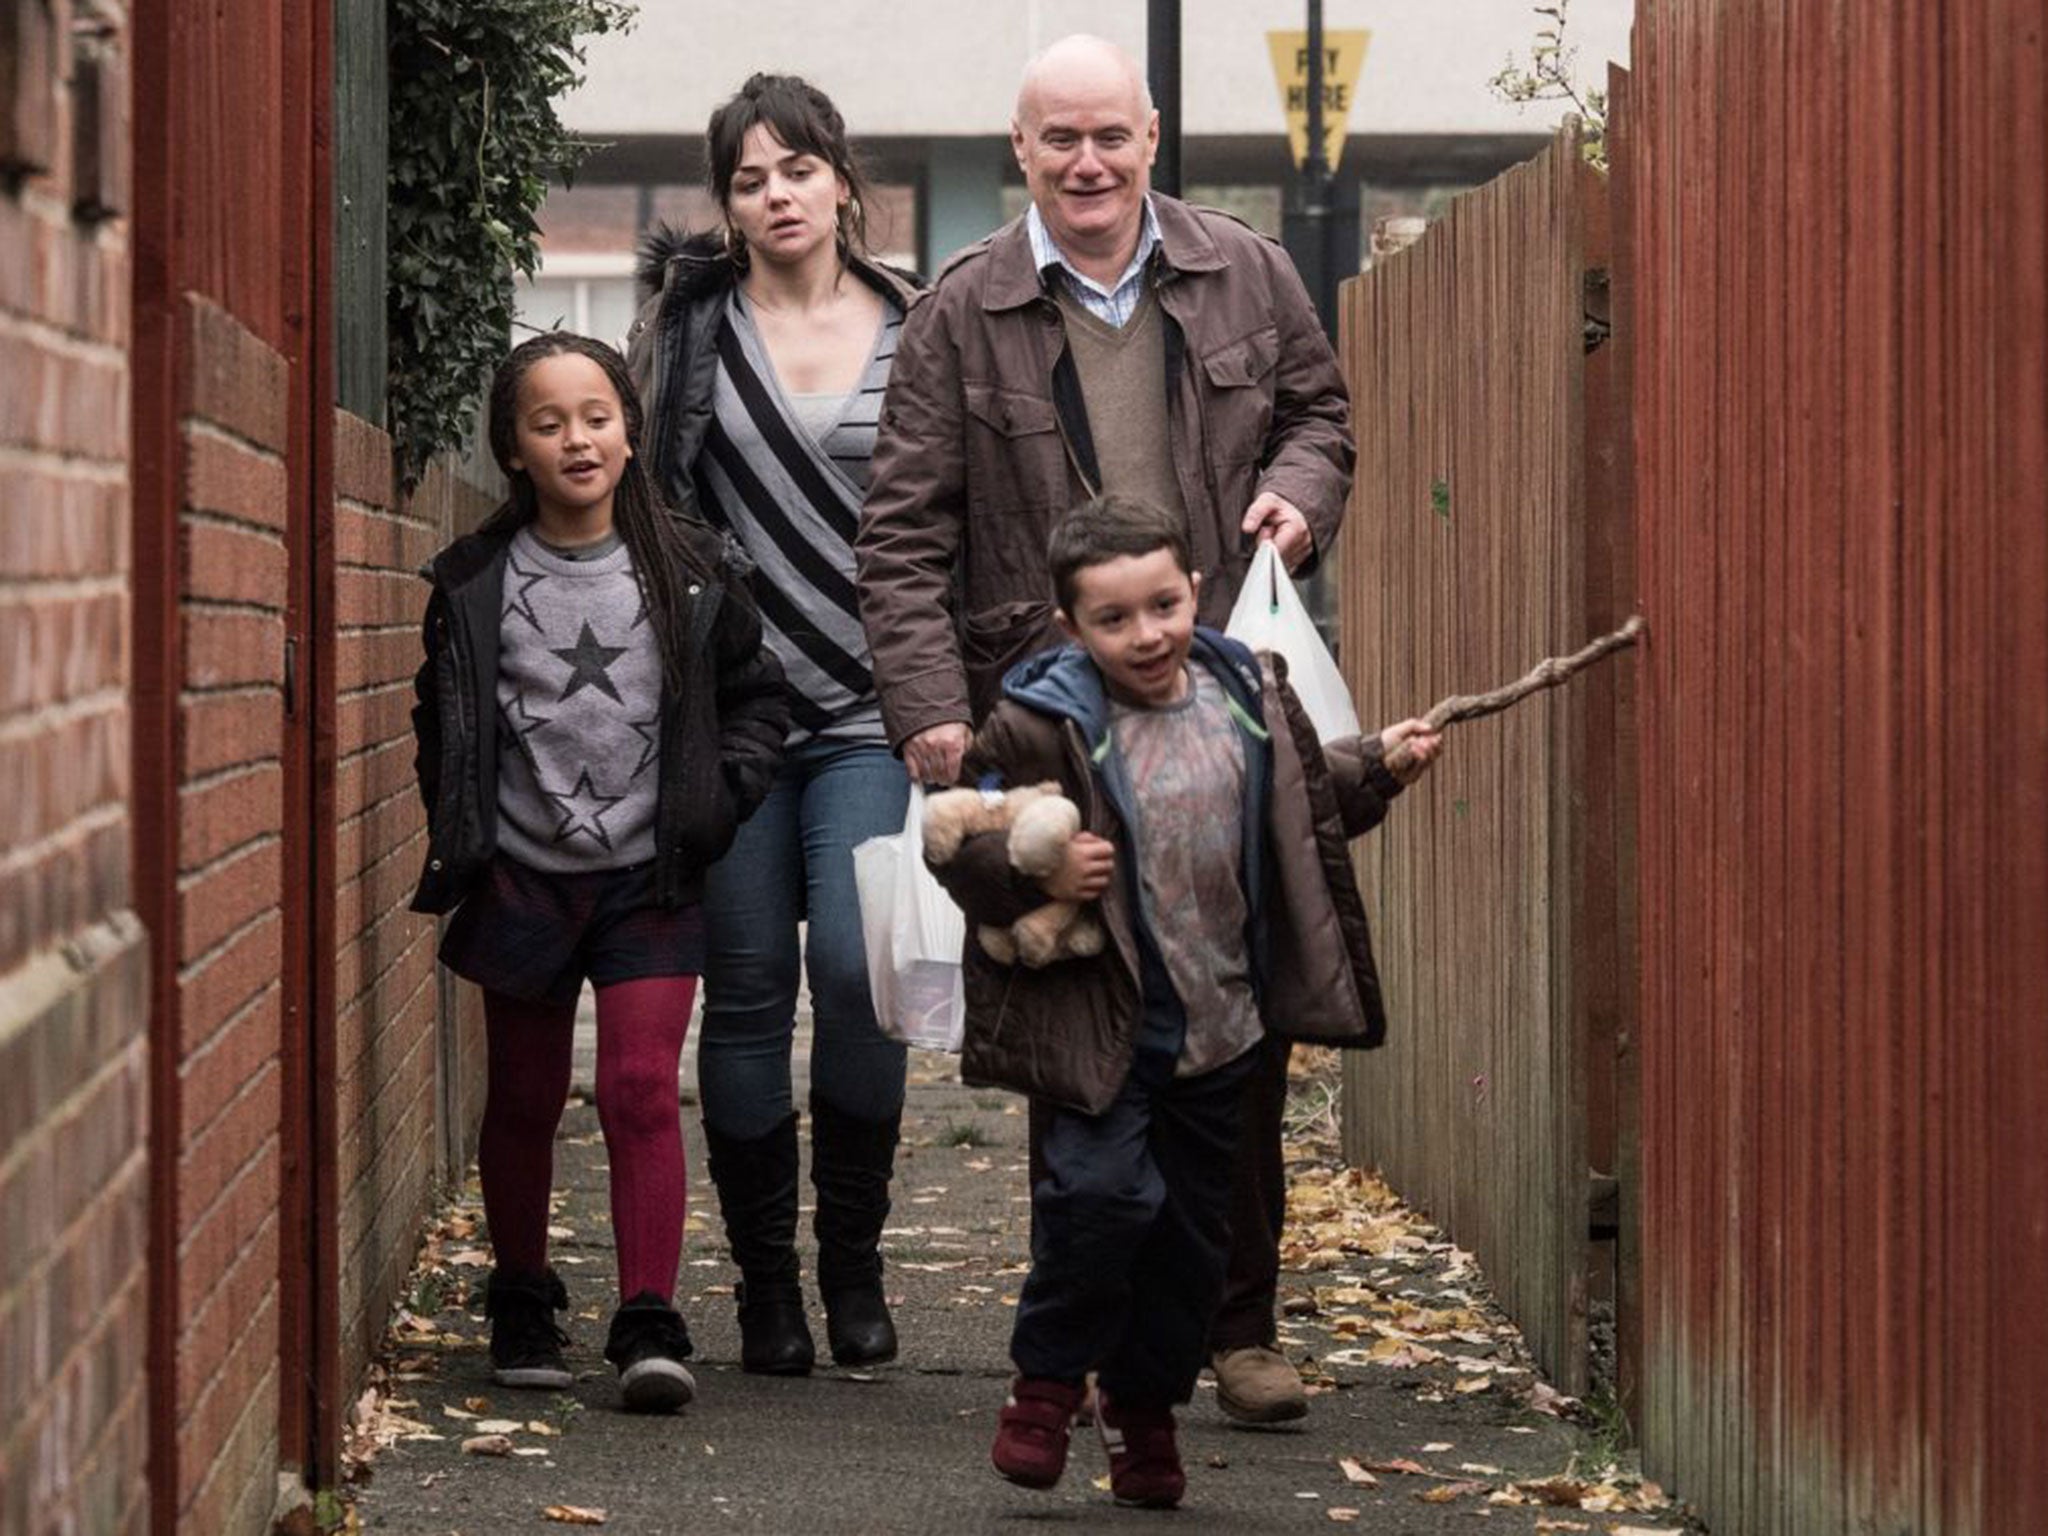 "I, Daniel Blake" is a drama about a middle-aged widower in northern England who can neither work nor get government benefits after a heart attack